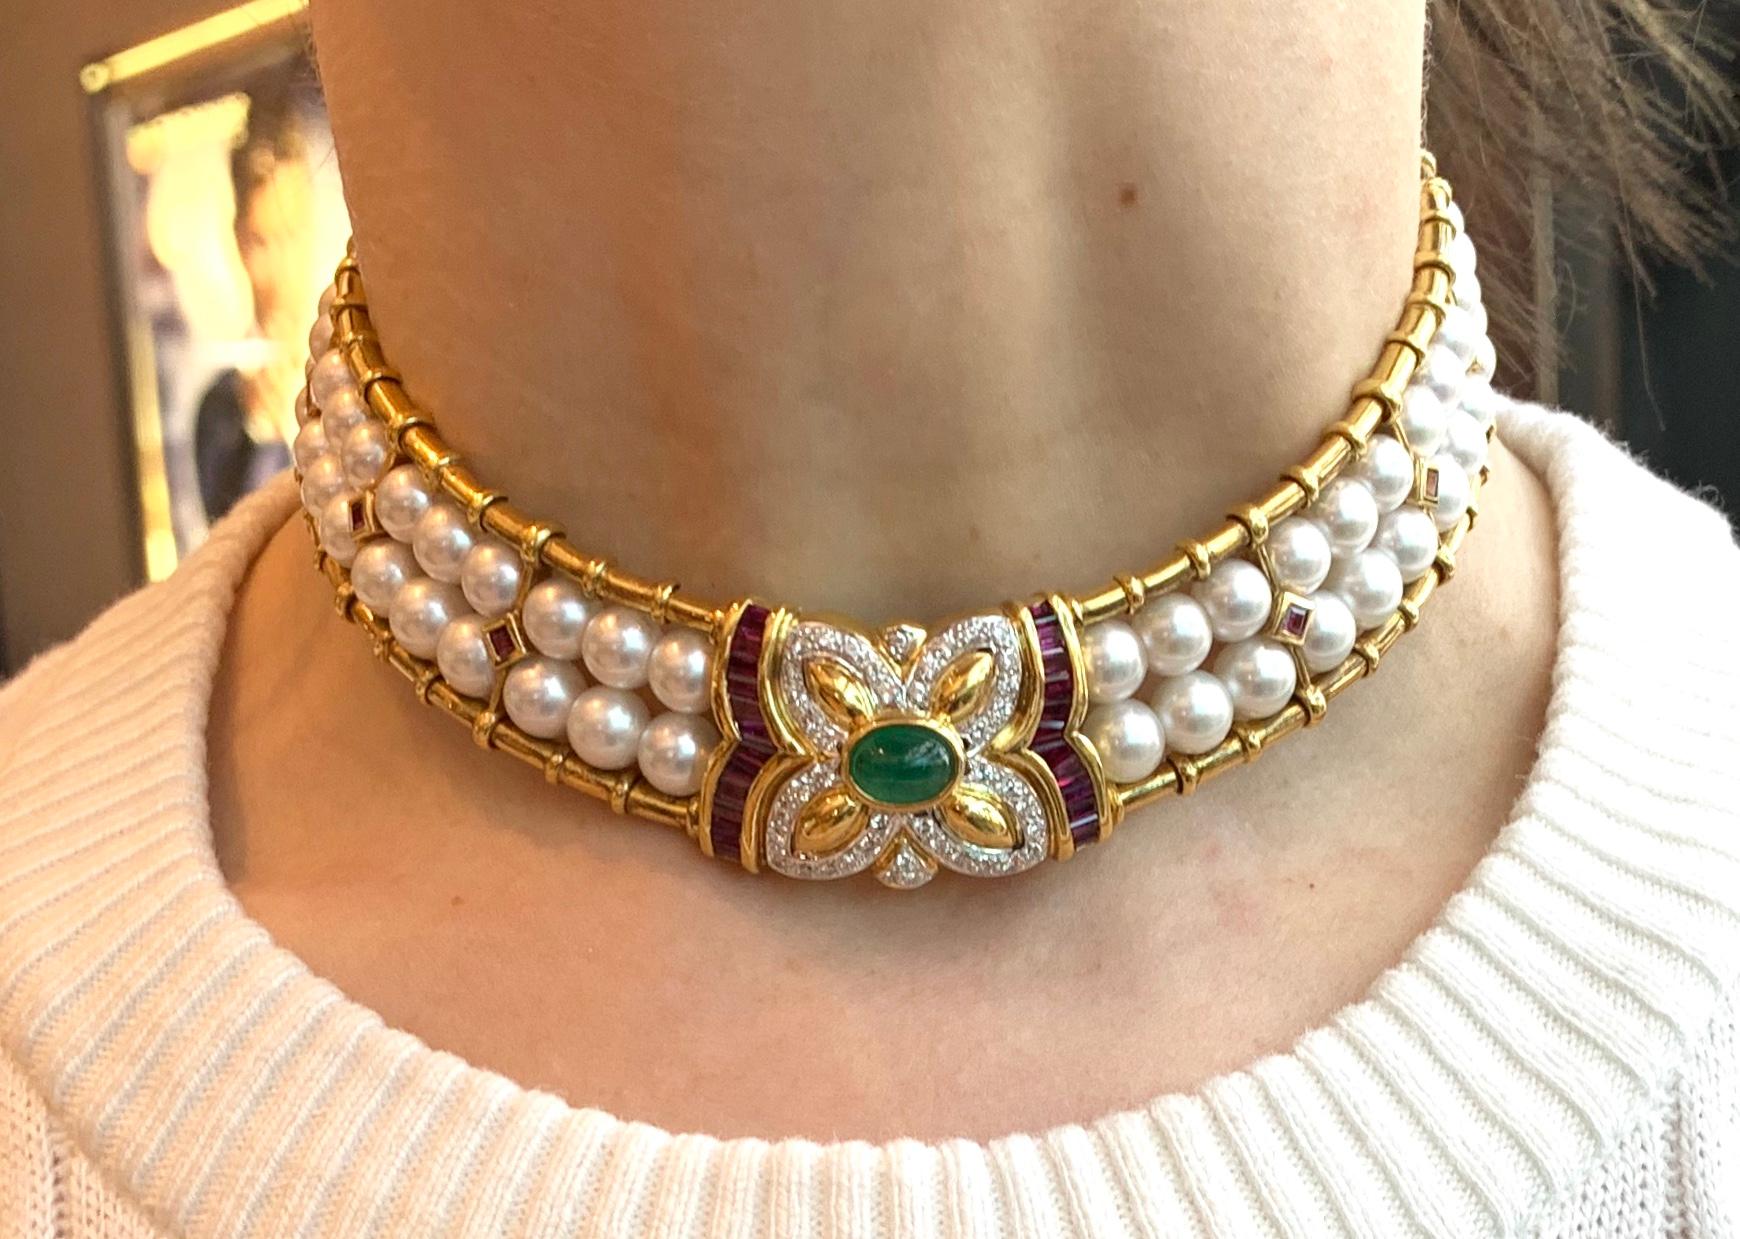 18 Karat Victorian Inspired Pearl, Diamond, Ruby and Emerald Choker Necklace 8